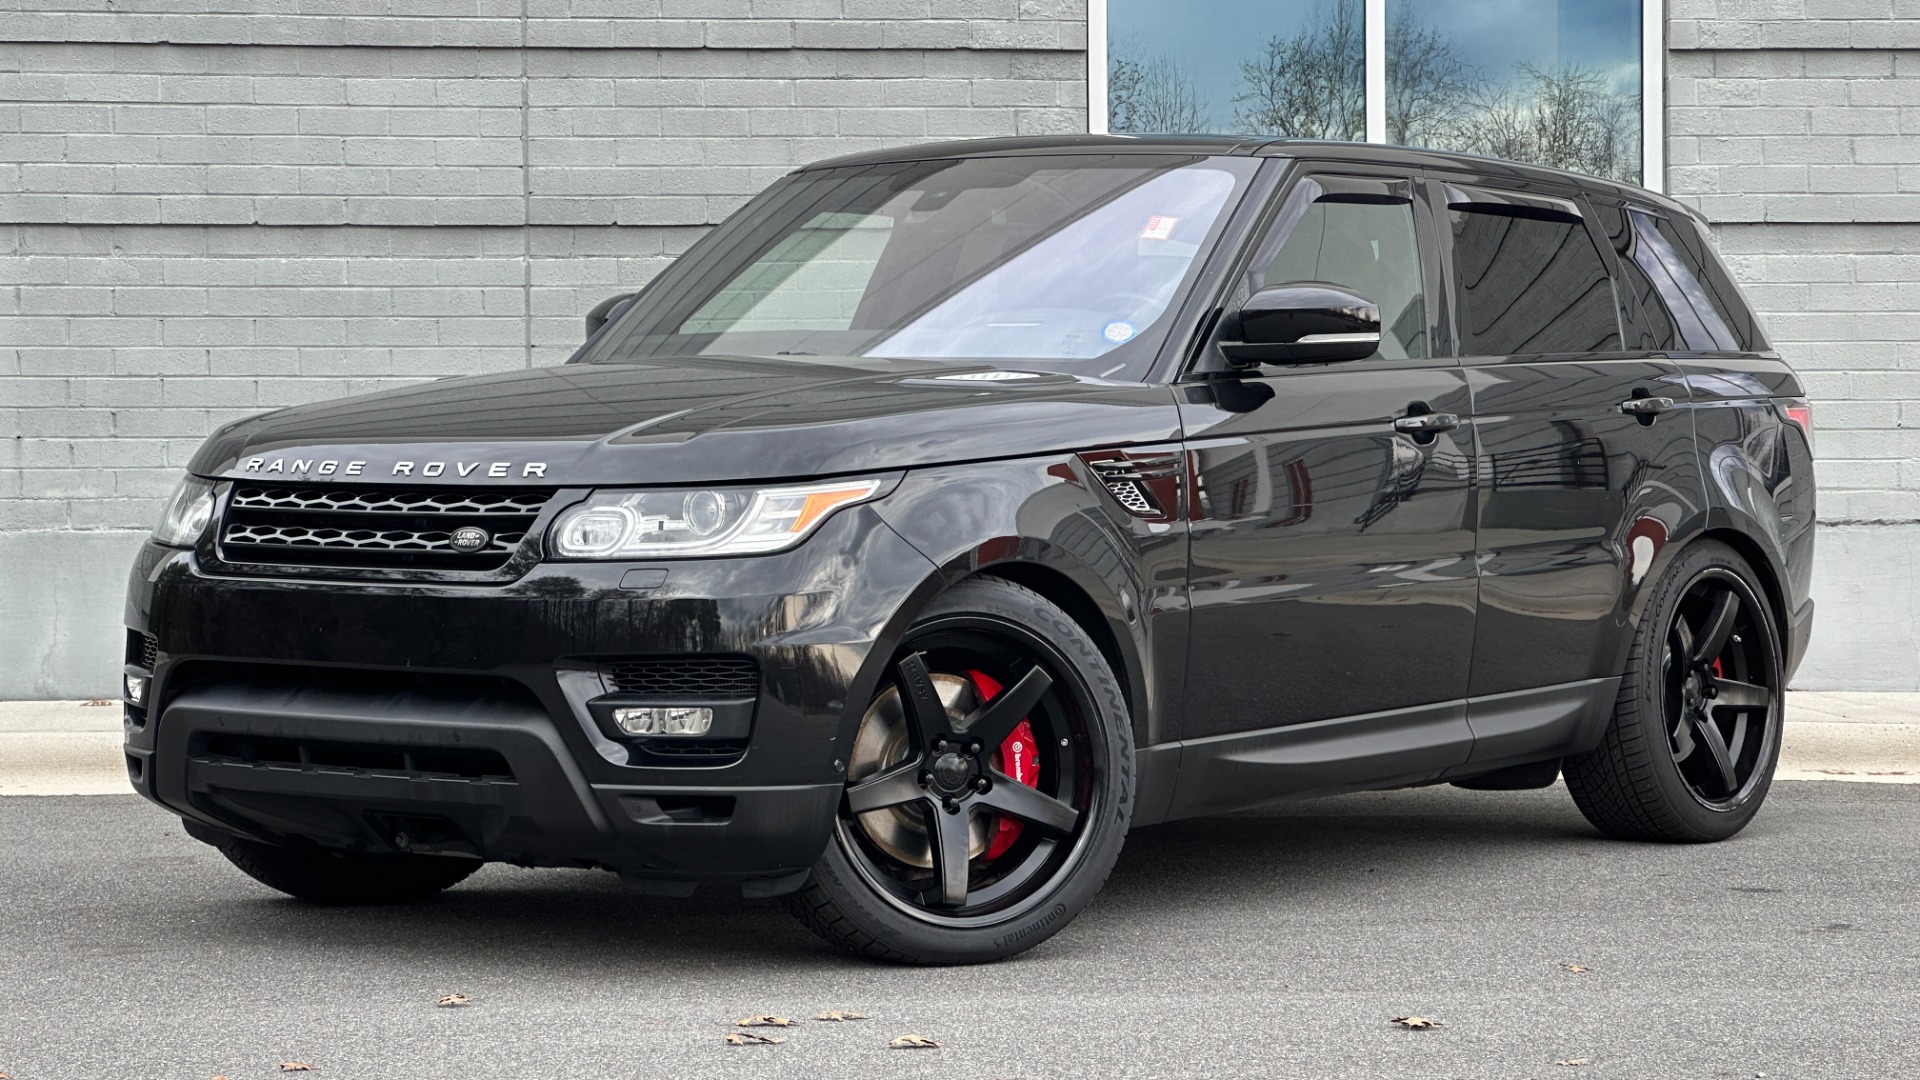 Used 2016 Land Rover Range Rover Sport V8 DYNAMIC / RED SUPERCHARGED / 22IN WHEELS / DRIVER ASSIST for sale $34,995 at Formula Imports in Charlotte NC 28227 1